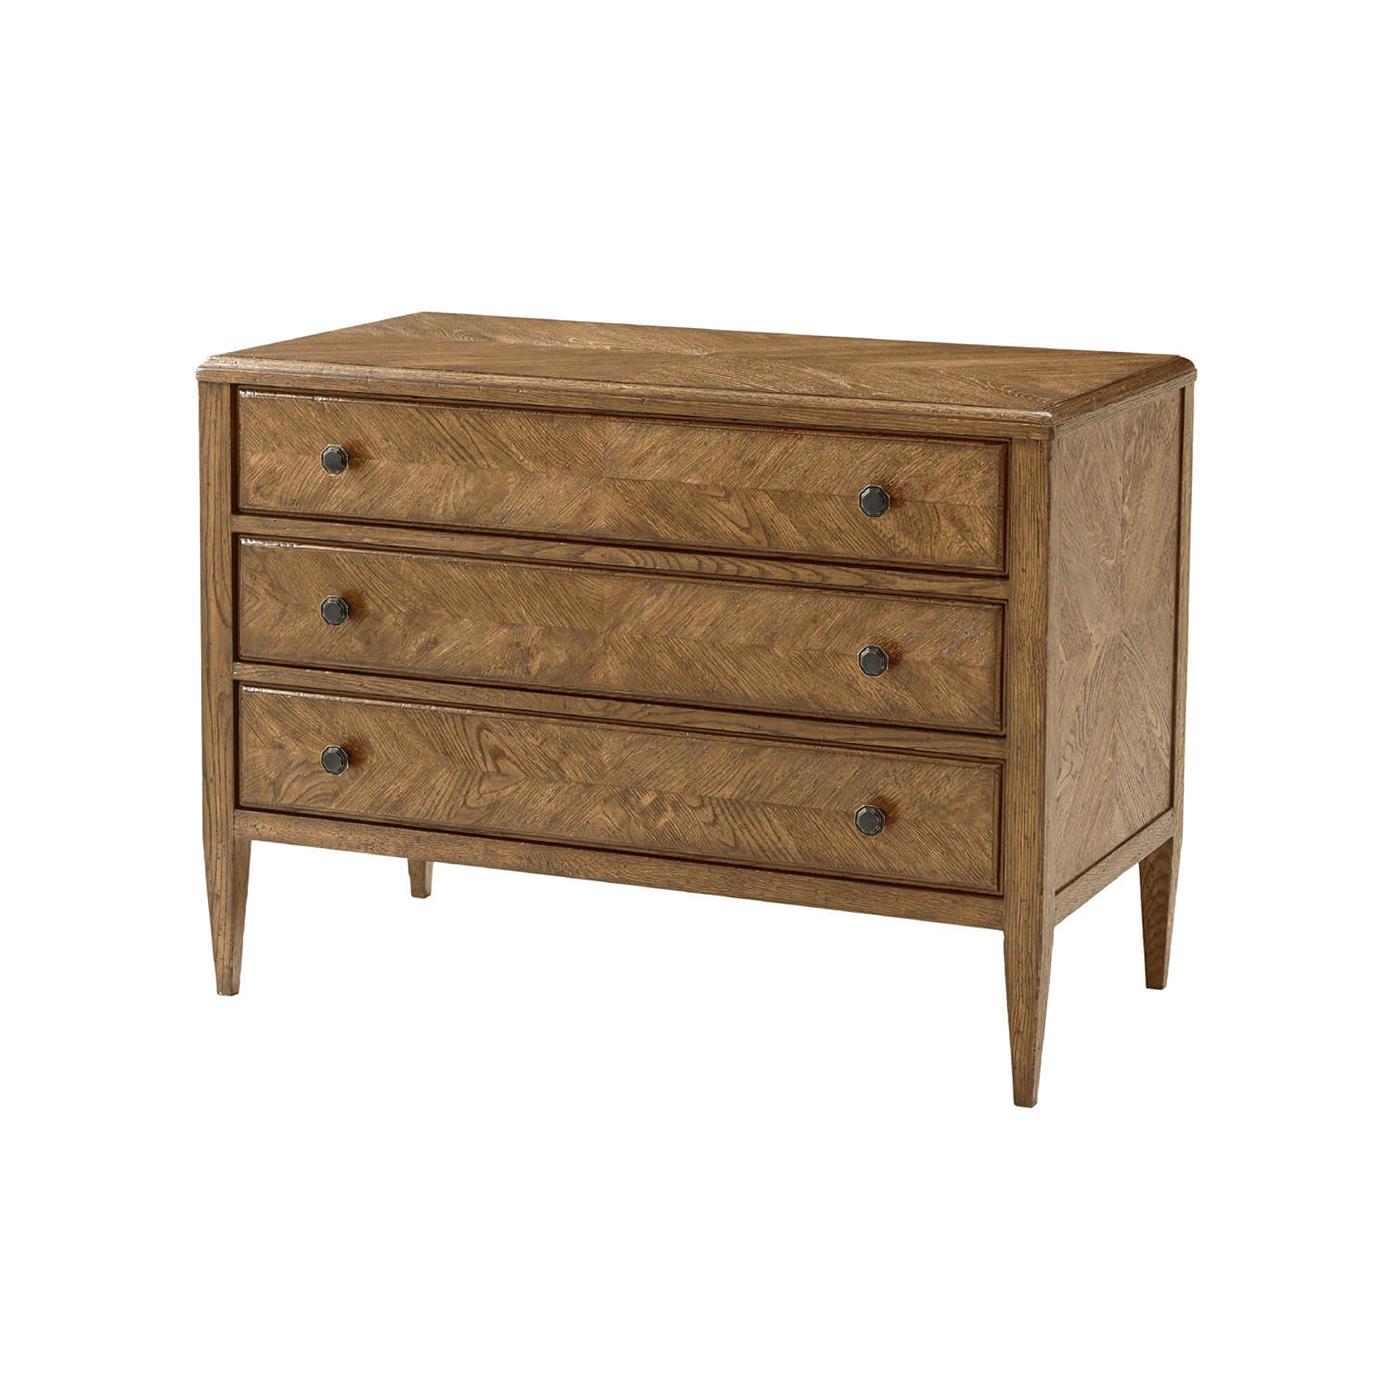 A light oak parquetry chest of drawers in dawn finish. It has mirrored herringbone oak parquetry drawers, classically tapered legs, and six Verde Bronze finish handles. 
Shown in dawn finish
Dimensions: 38